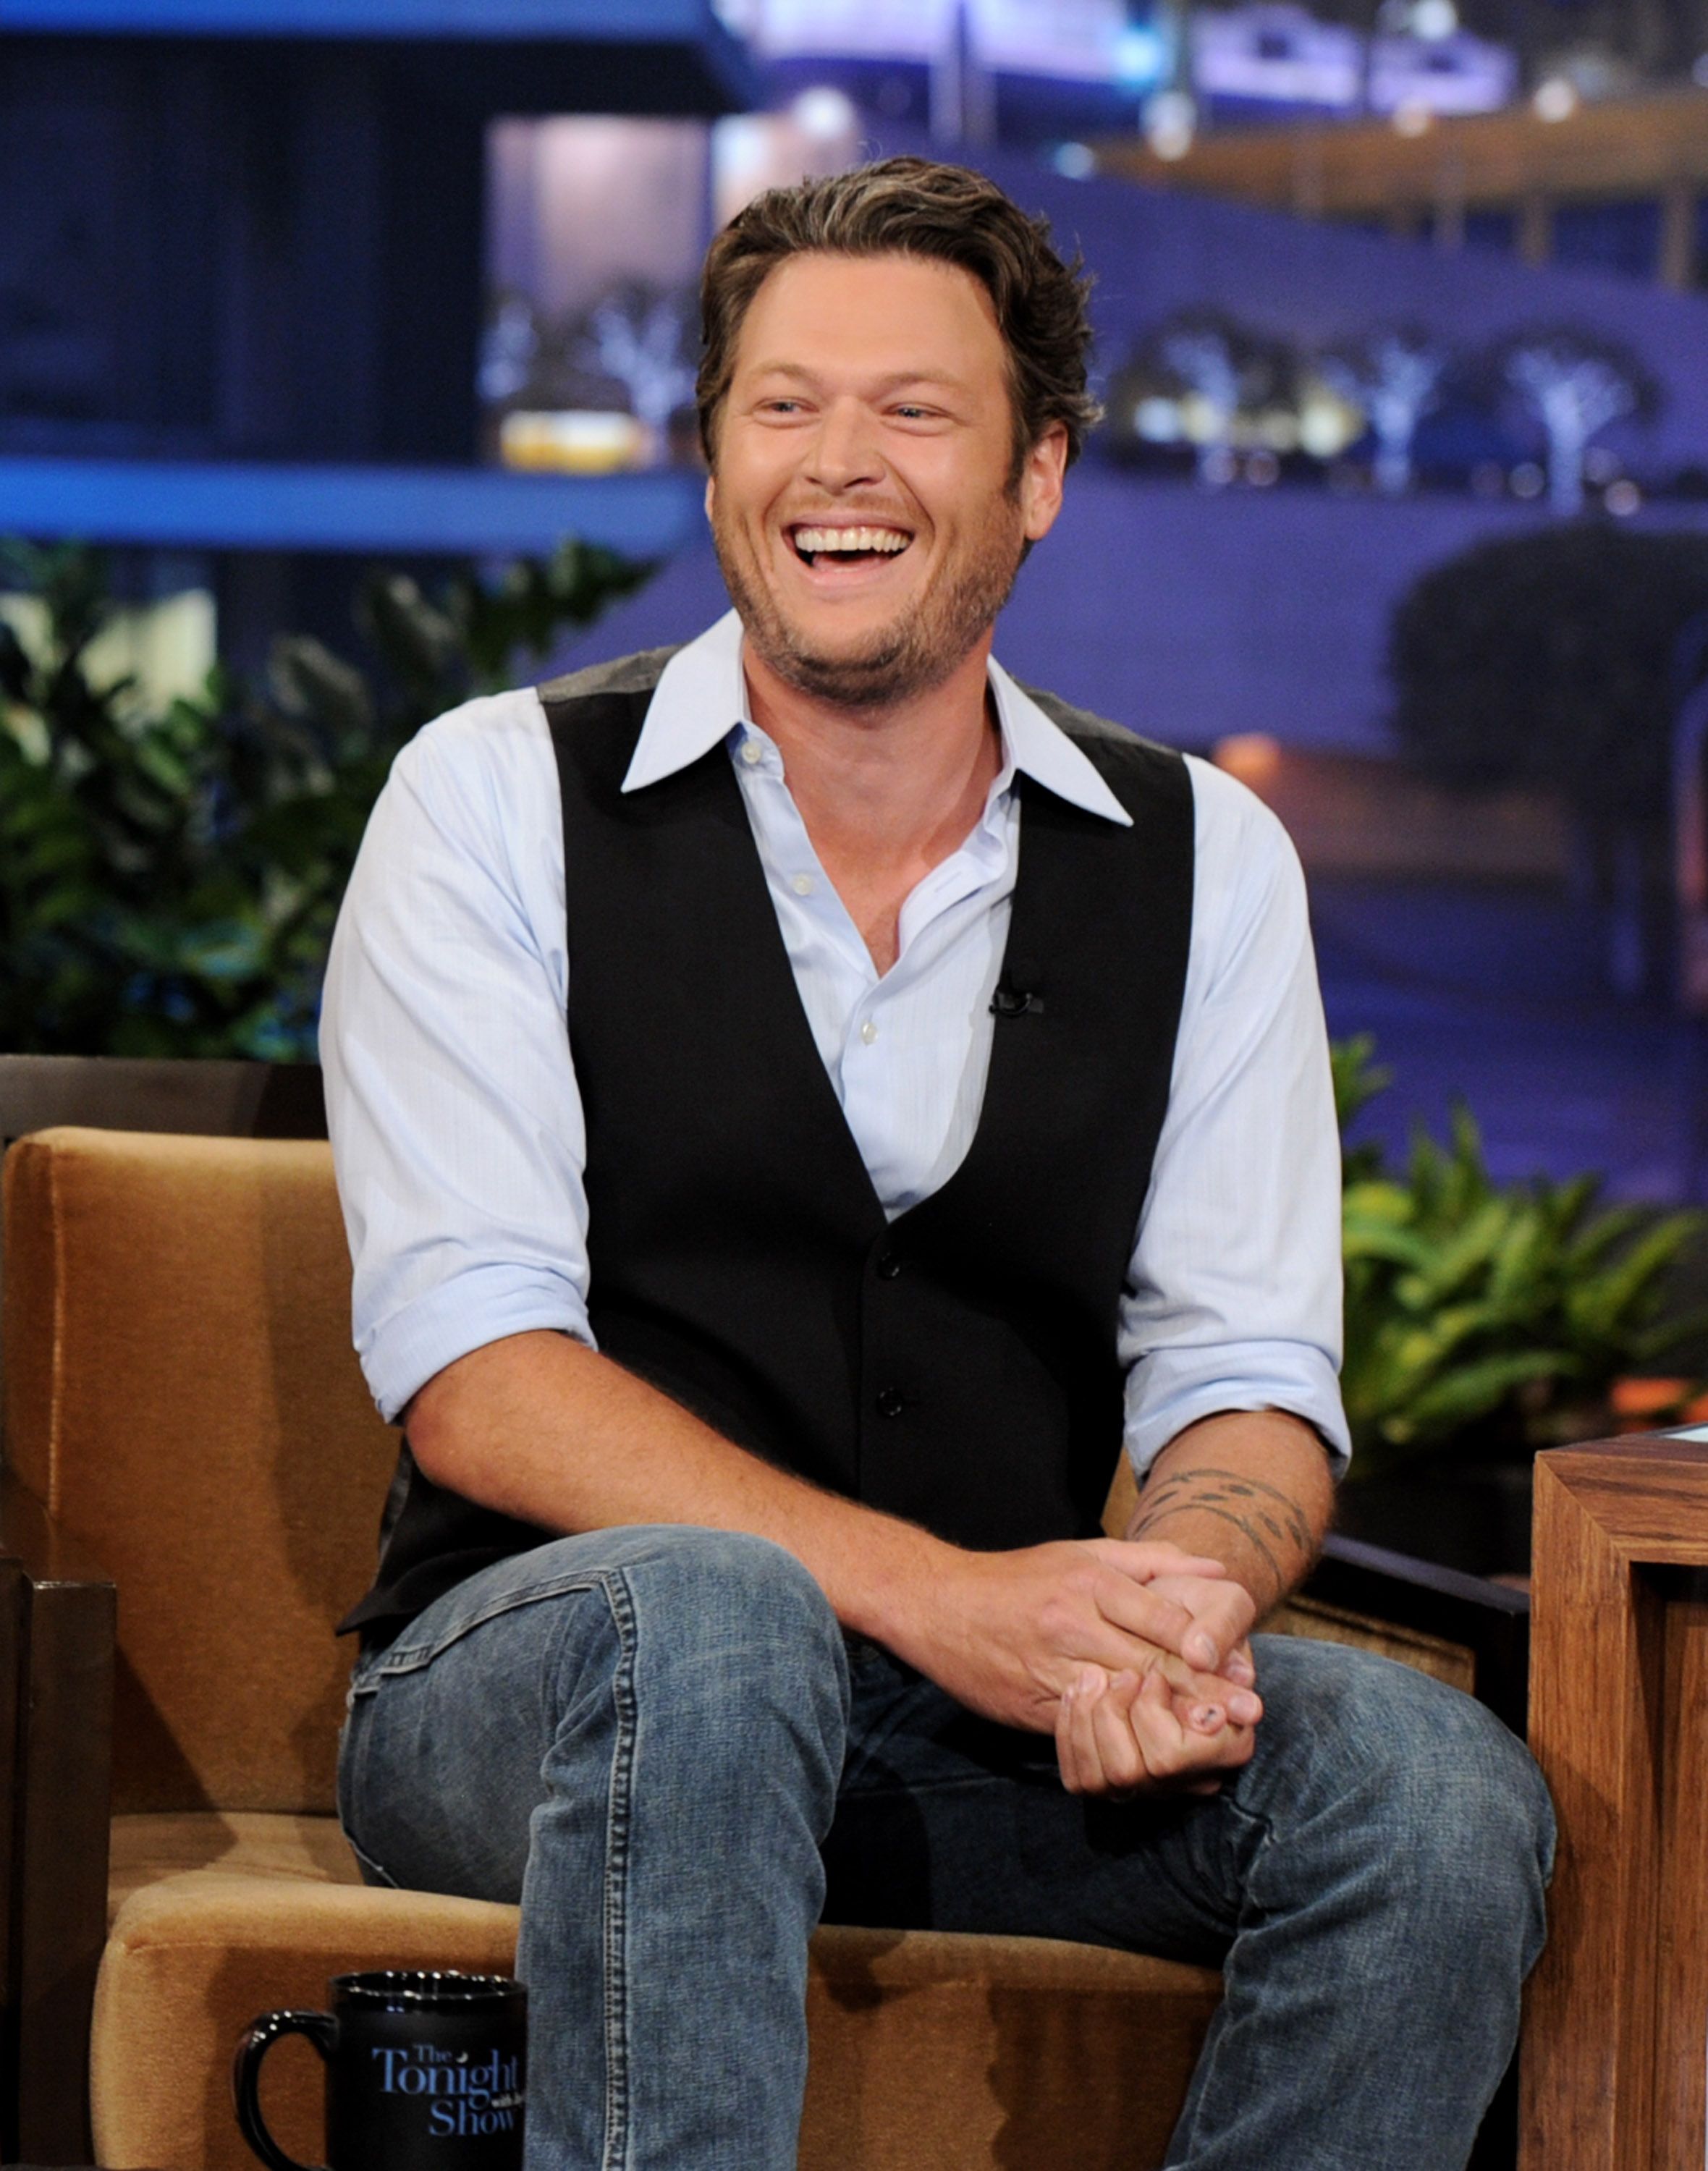 Blake Shelton appears on the "Tonight Show with Jay Leno" at NBC Studios on June 15, 2011, in Burbank, California | Photo: Kevin Winter/Tonight Show/Getty Images